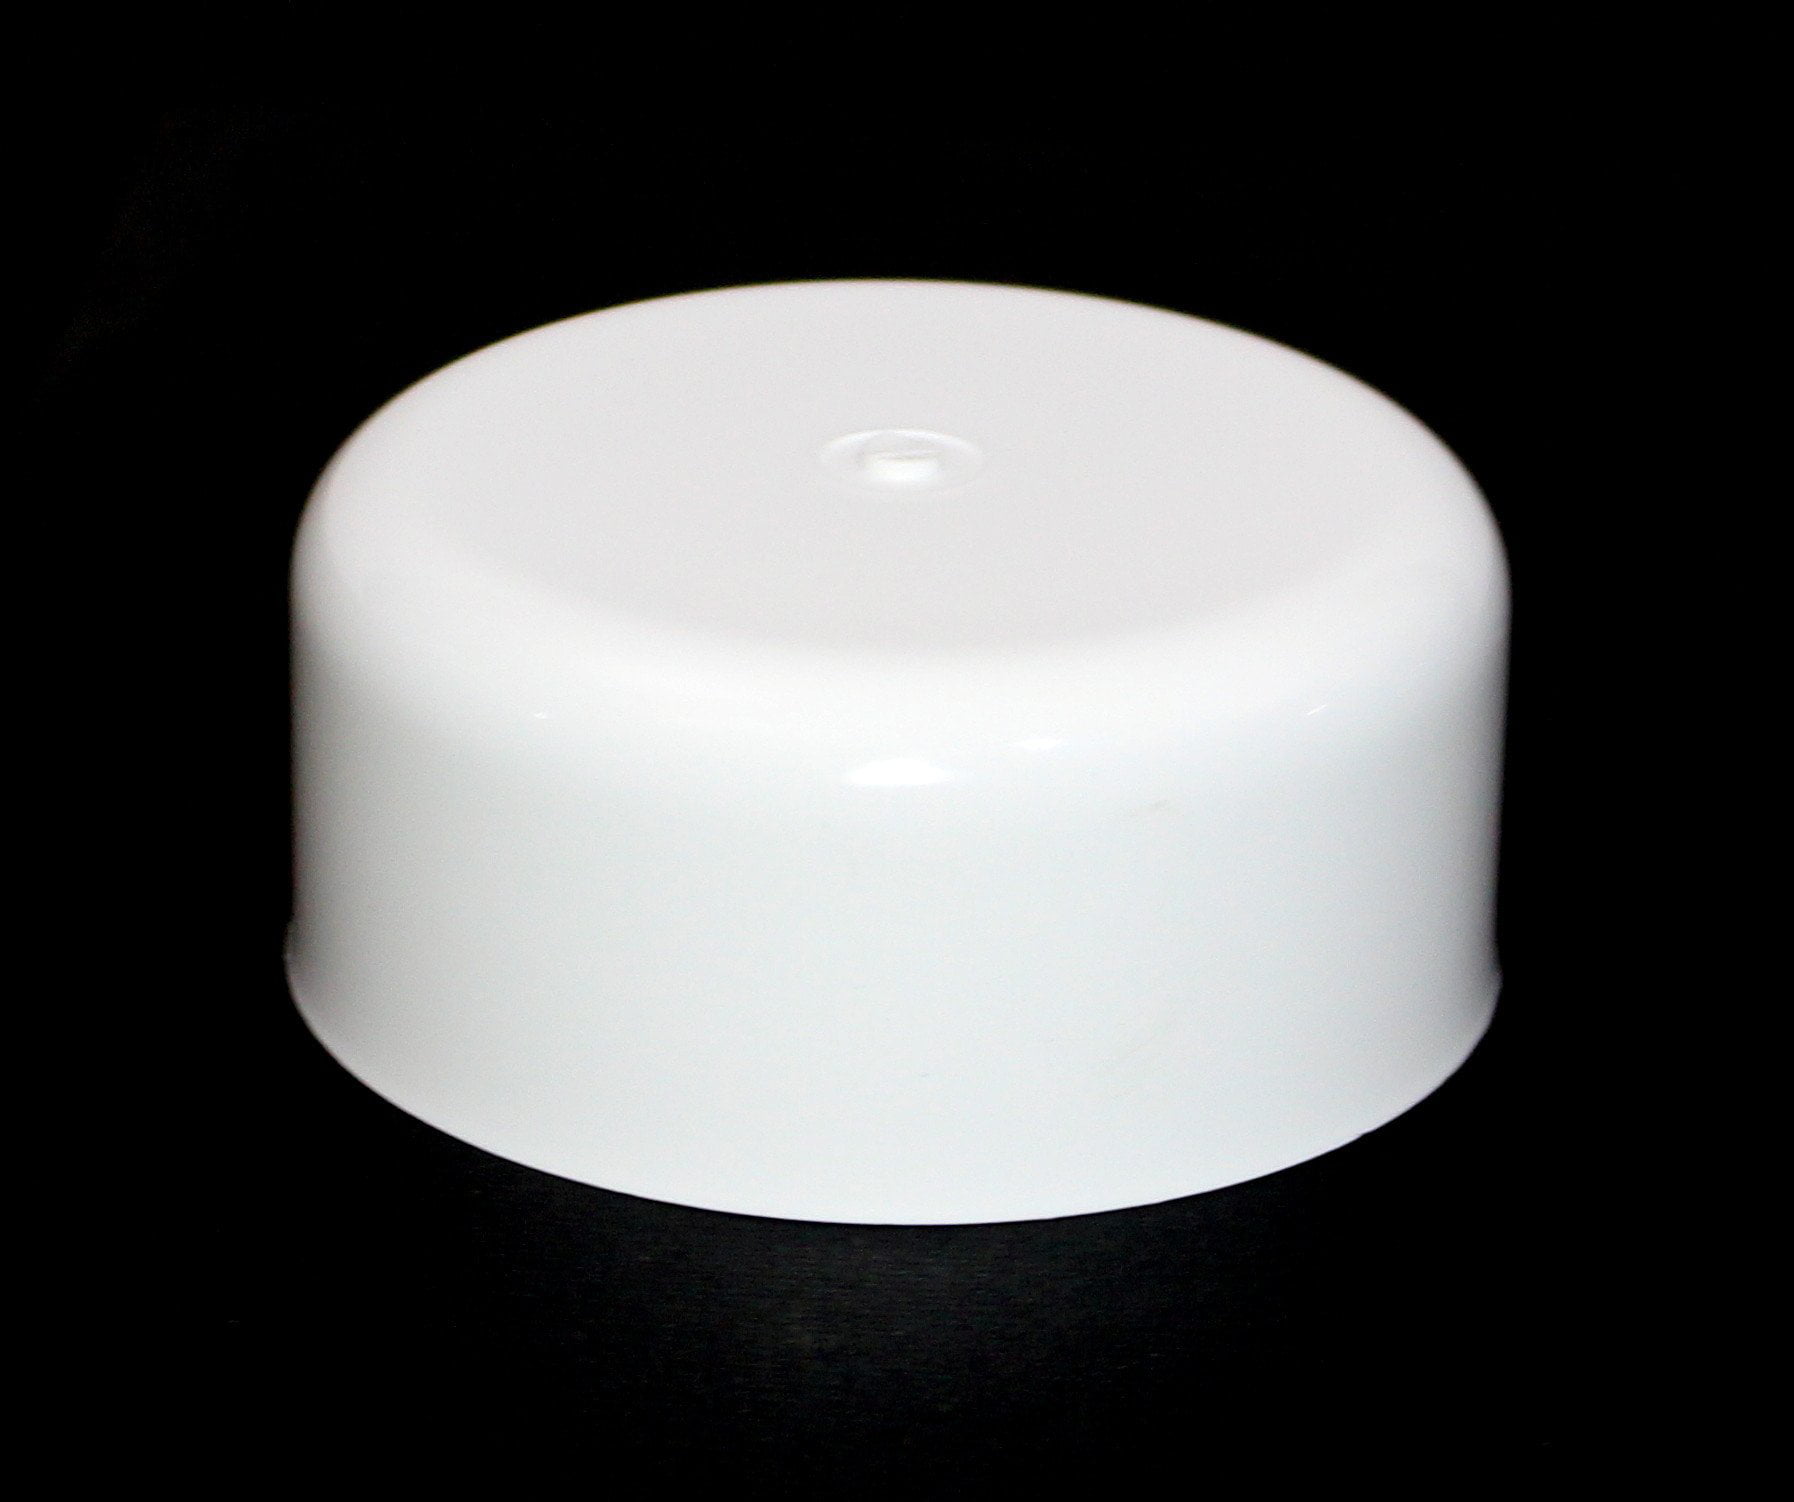 Linic 2 x White 4" 100mm Plastic ROUND Fence Post Caps Rot Proof UK Made GT0038 